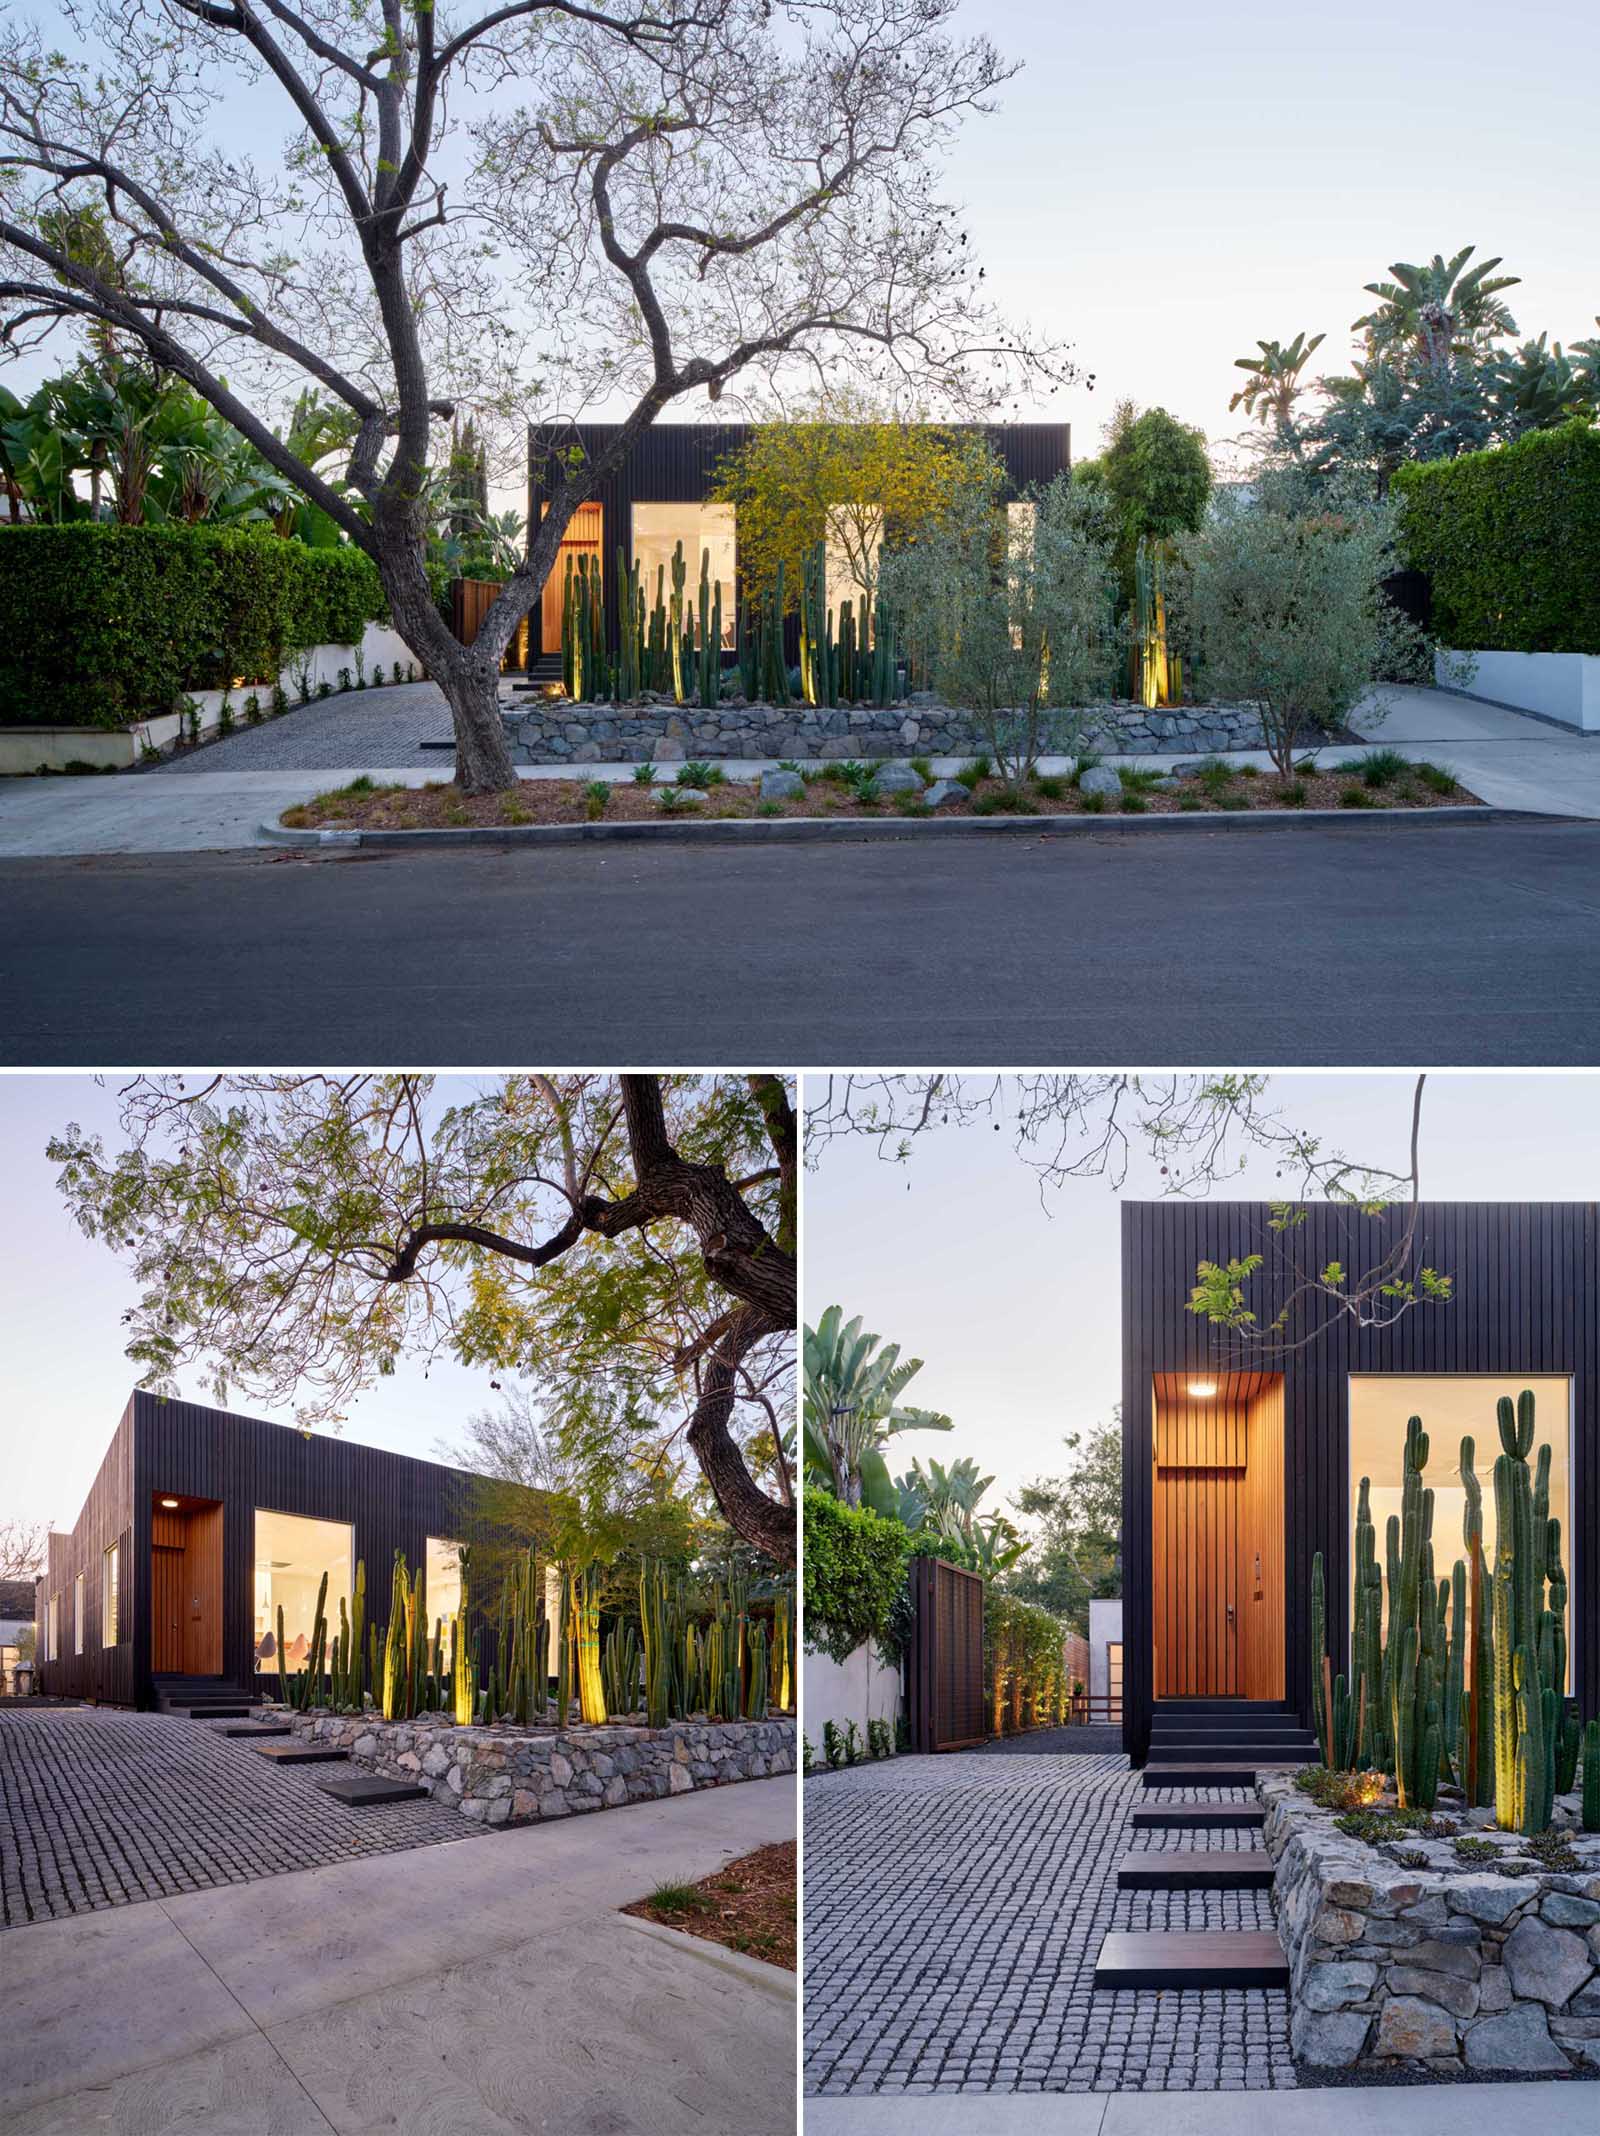 At night, lighting highlights the tall cacti and the wood front door of this modern house.